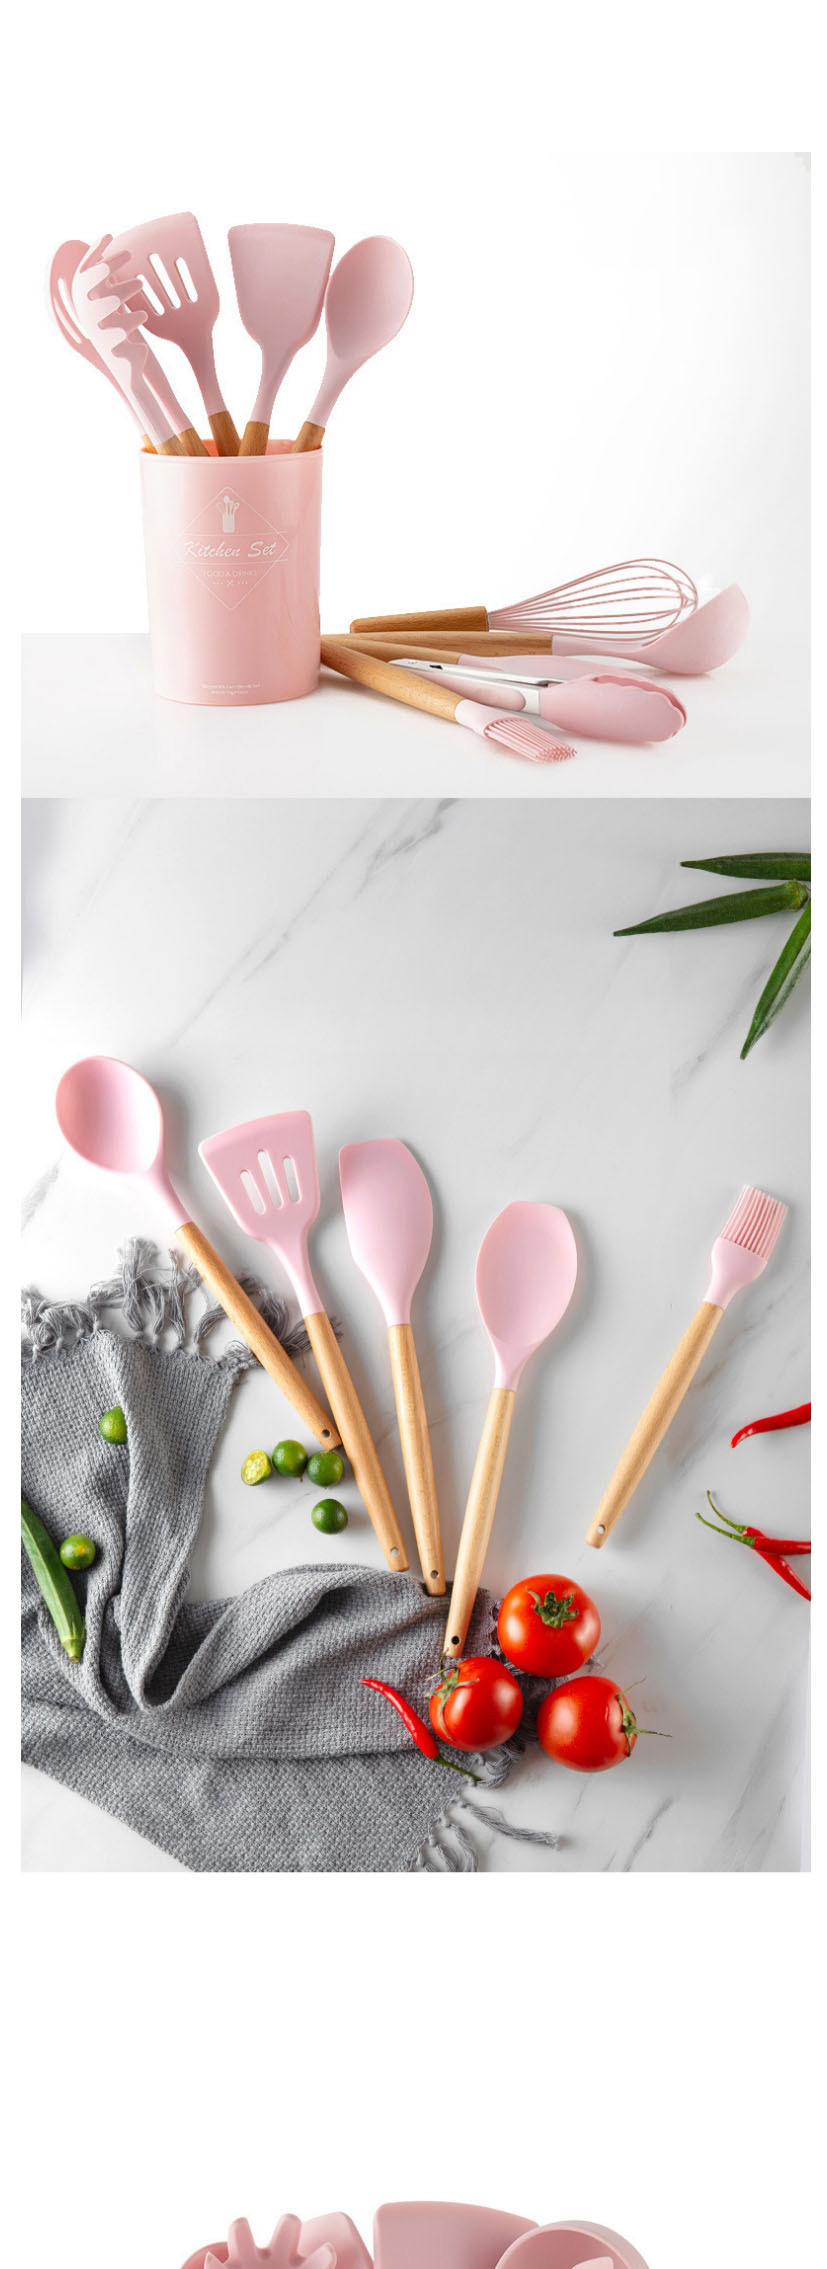 Fashion Nine Piece B Pink Solid Wood Handle With Bucket And Silica Gel Kitchenware,Kitchen